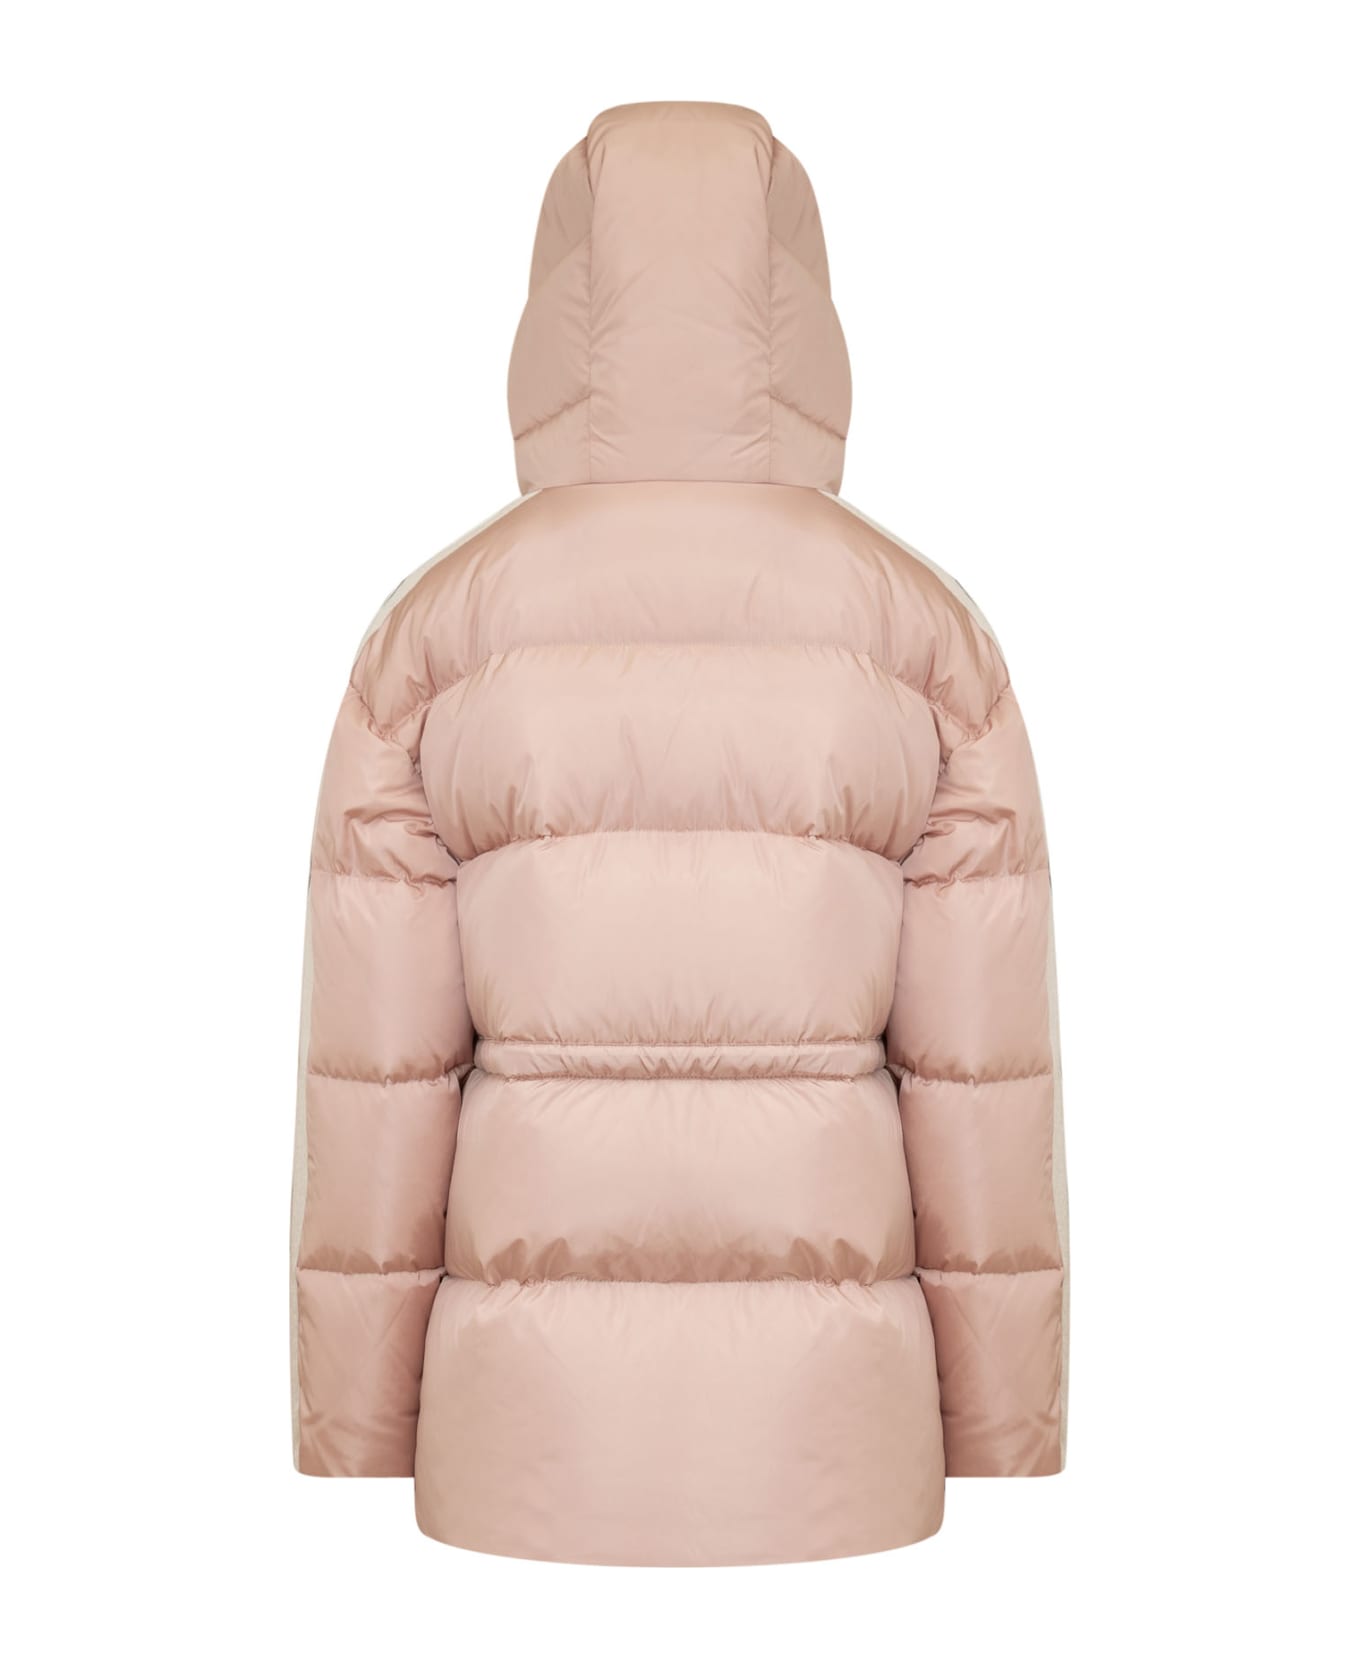 Palm Angels Nylon Down Jacket With Logo - Pink